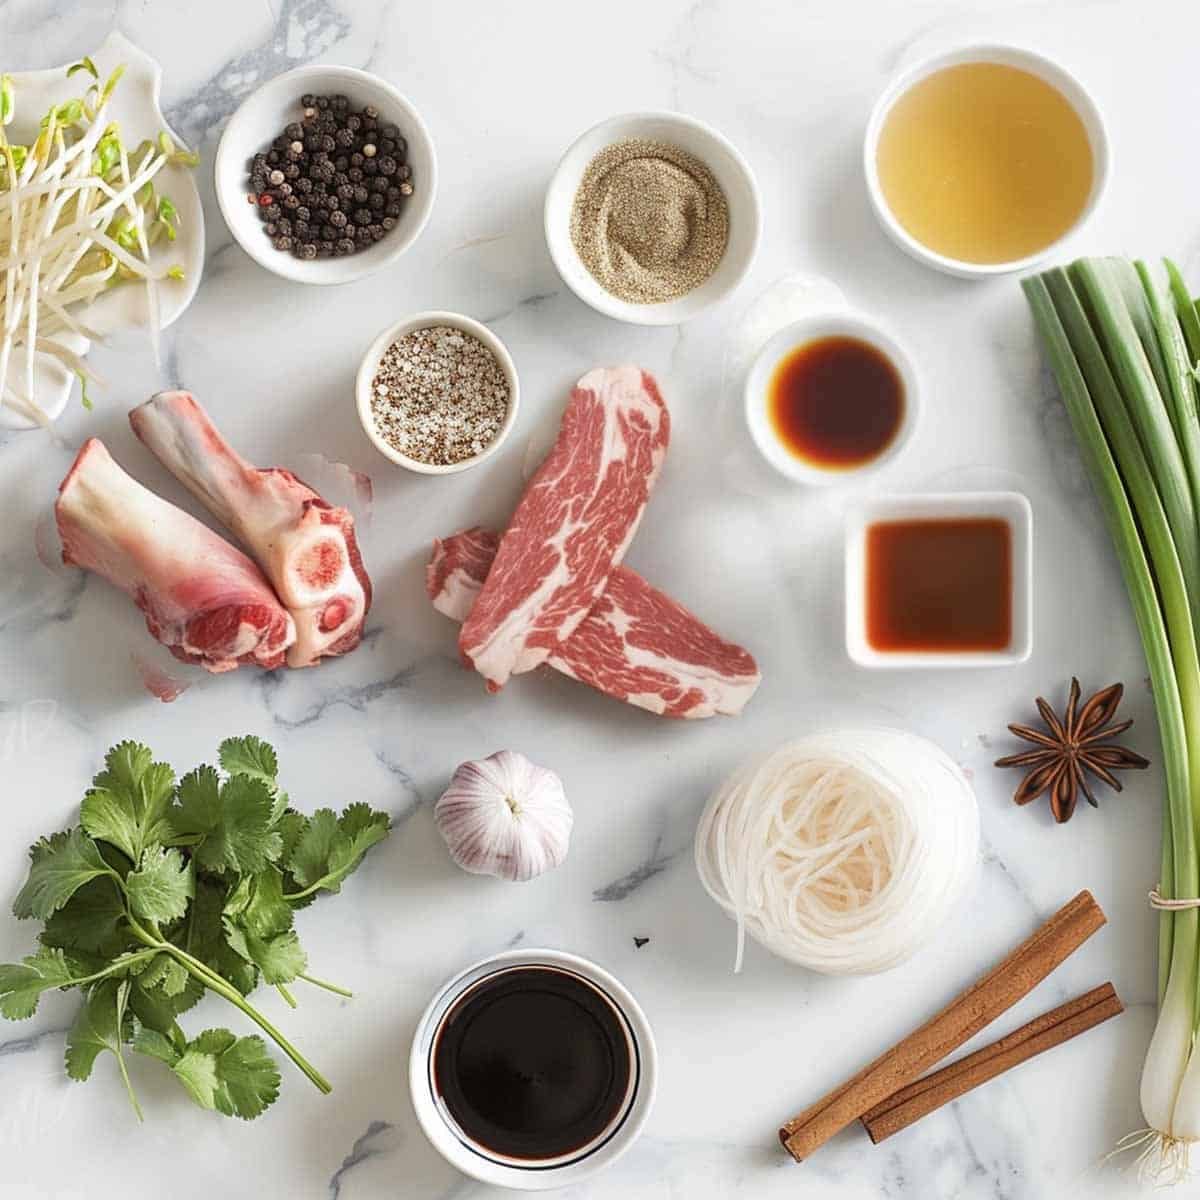 An array of ingredients for Thai Boat Noodles arranged neatly on a kitchen counter. Visible are beef bones, bottles of dark and light soy sauce, a small bowl of sugar, fish sauce, a cinnamon stick, star anise, black peppercorns, fresh rice noodles, thin slices of beef, bean sprouts, Chinese water spinach, fried garlic, chopped cilantro, green onions, and pickled mustard greens. Each ingredient is separated and clearly identifiable, ready for preparation